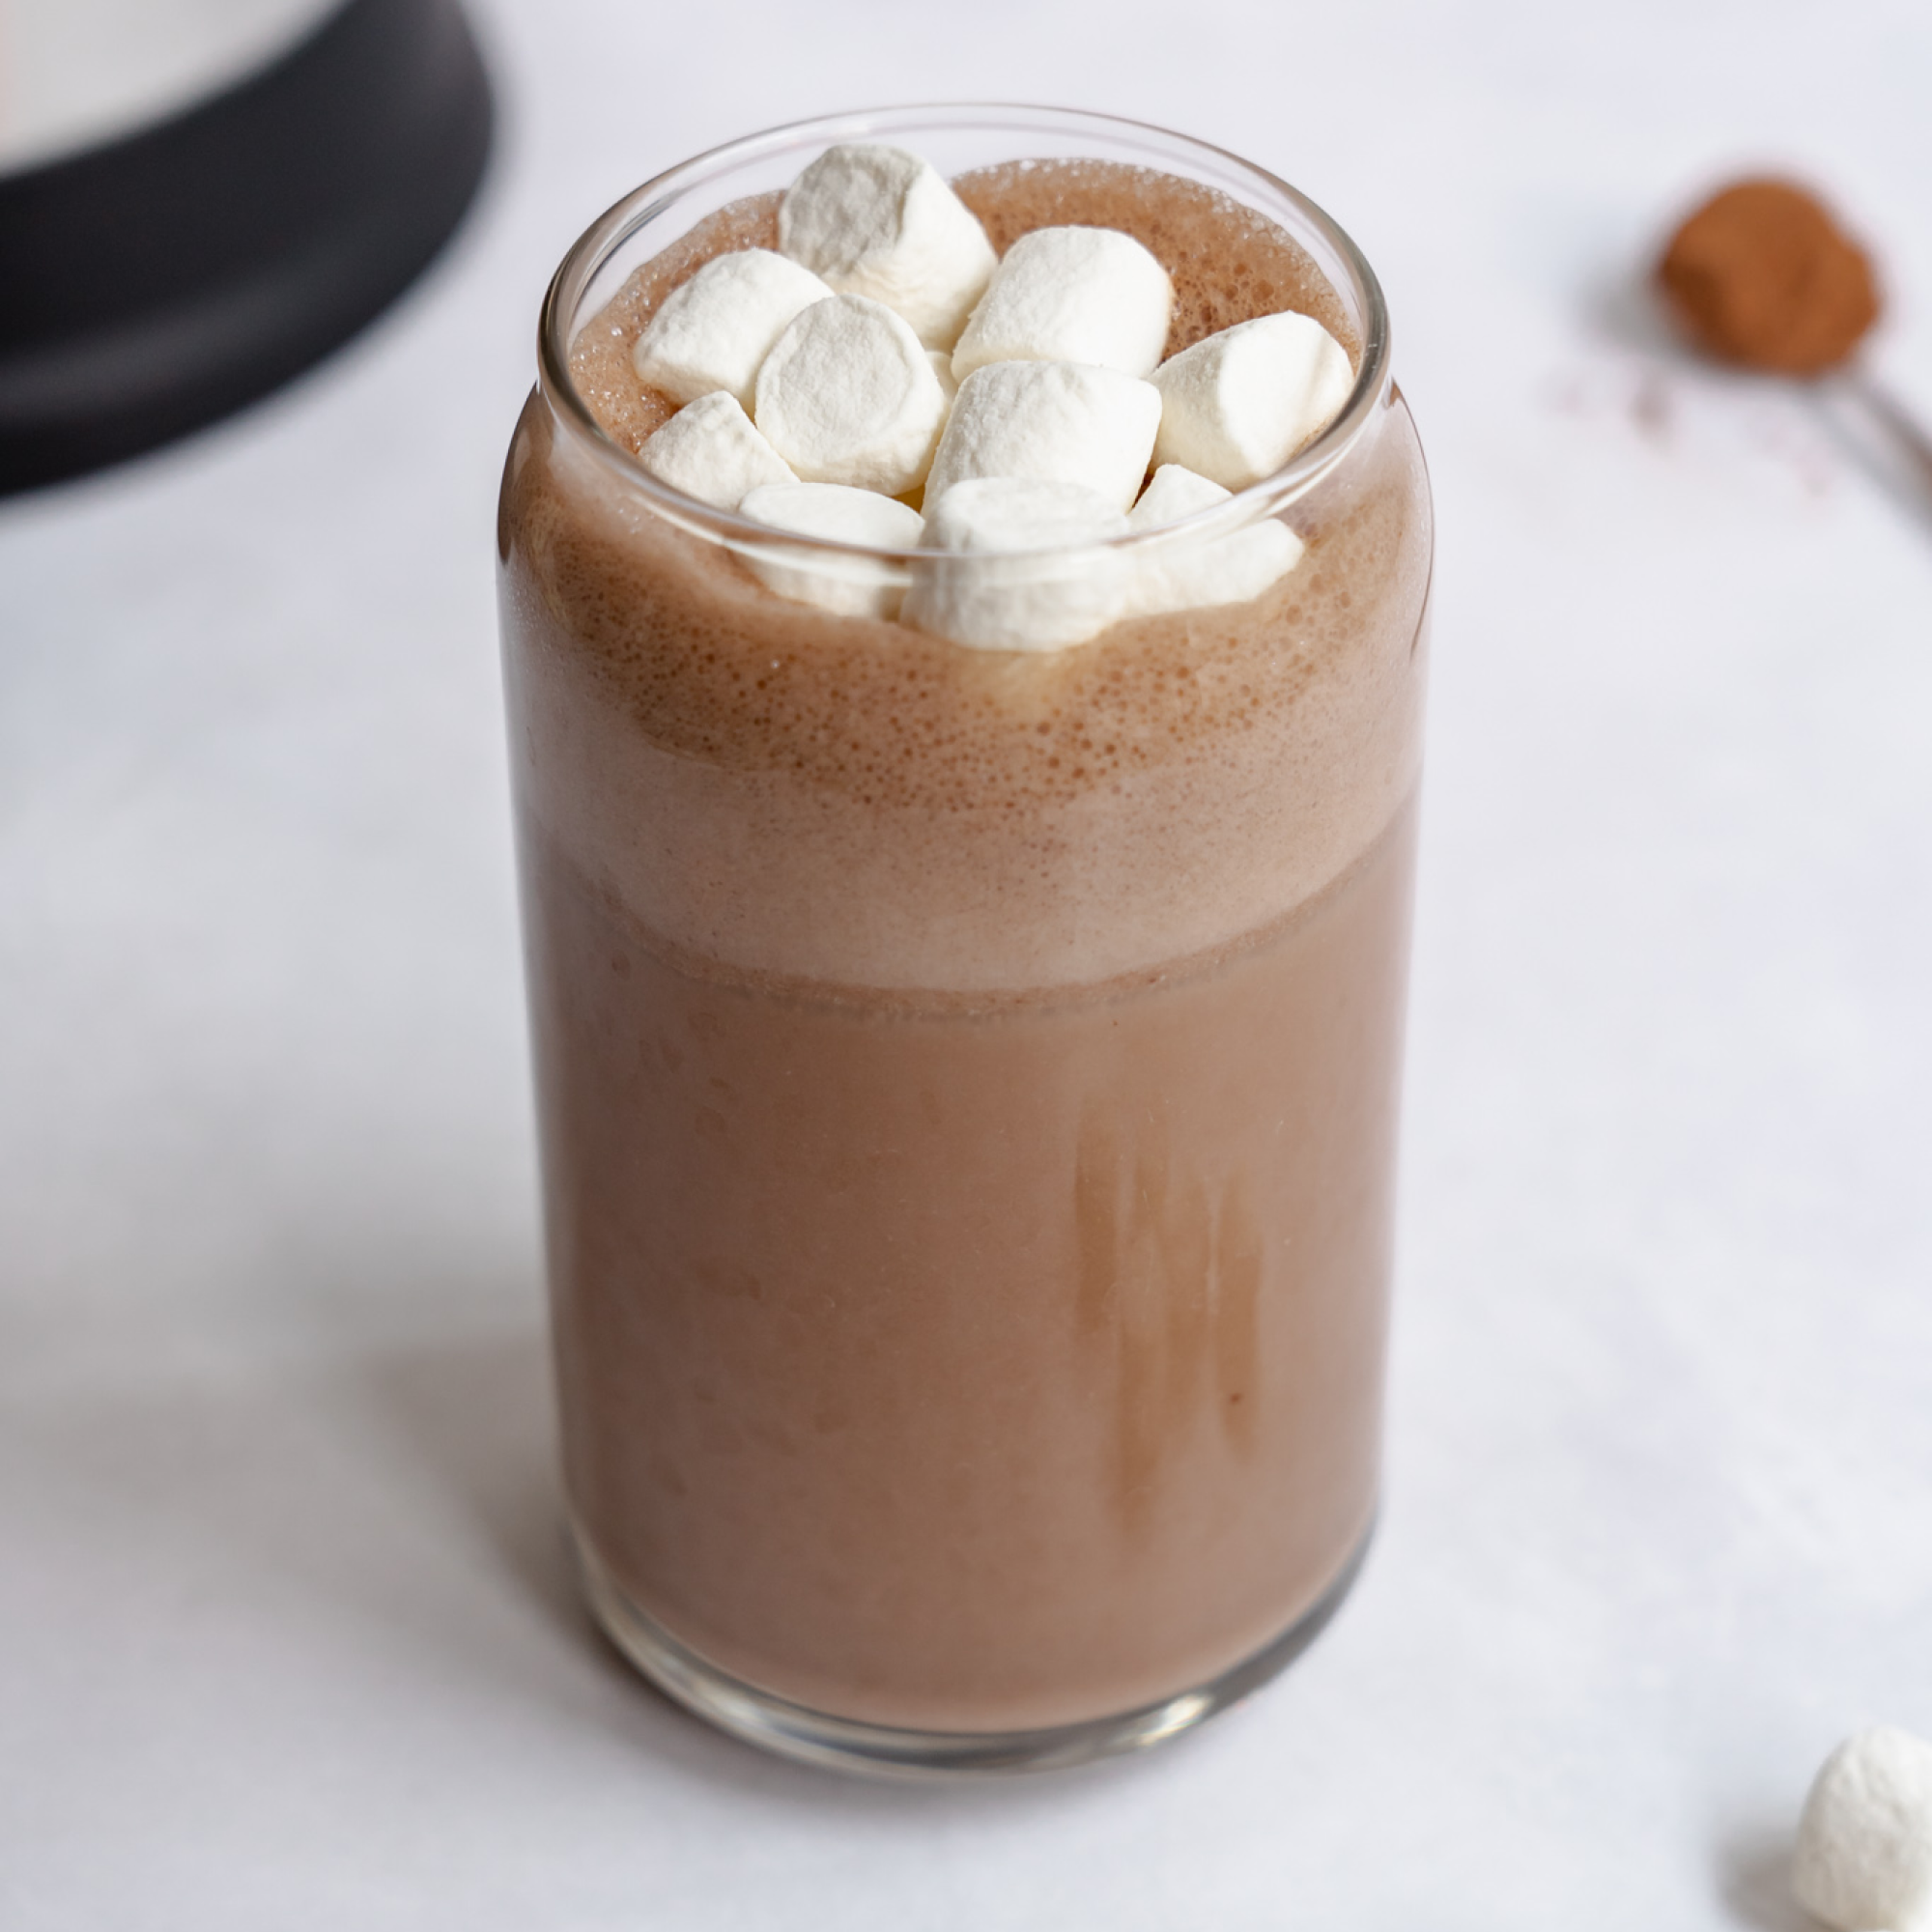 Rocky Road Milk prepared with Almond Cow machine, combining almonds, chocolate, and marshmallows